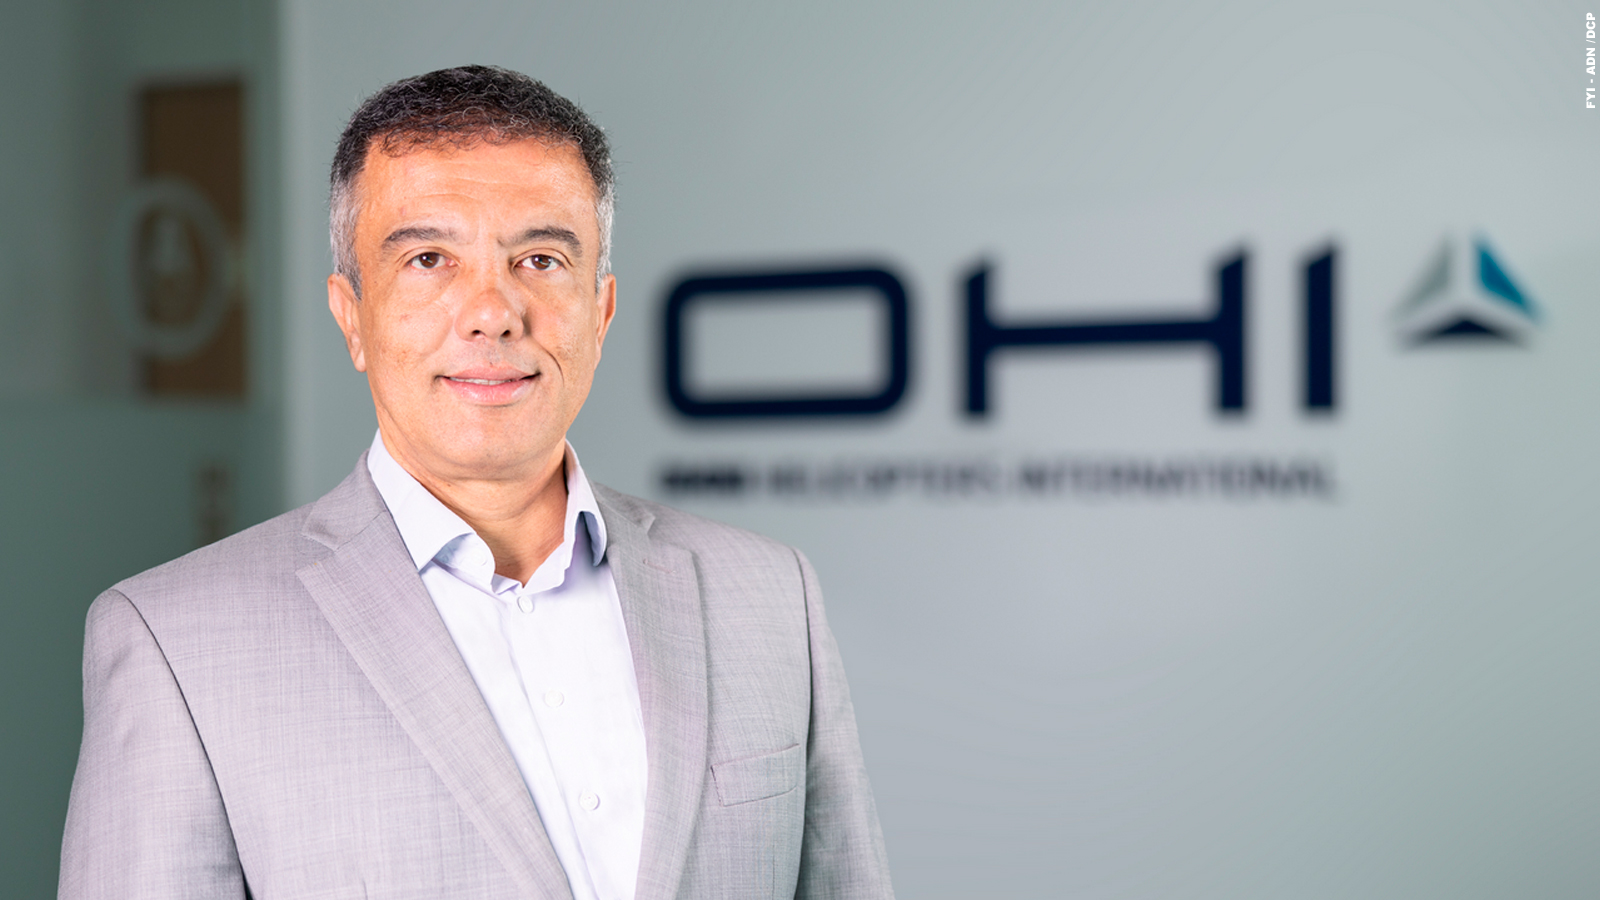 Paulo Couto takes over as transformation director at OMNI Helicopters International